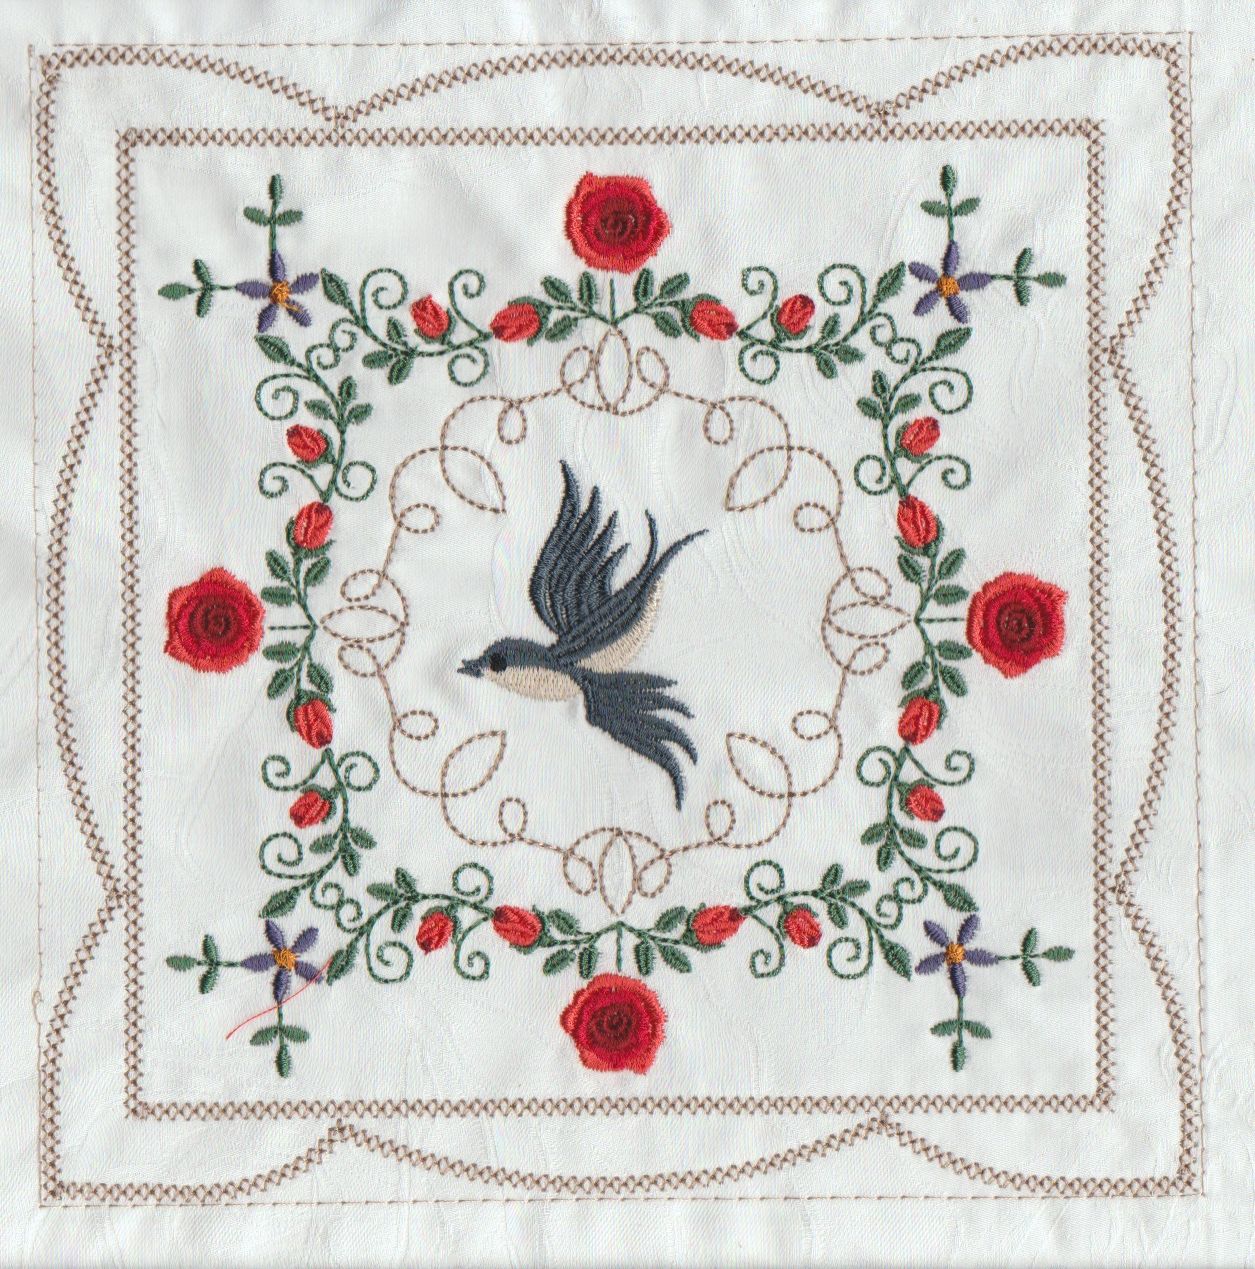 Bluebirds and Roses Quilt Blocks 8x8-3